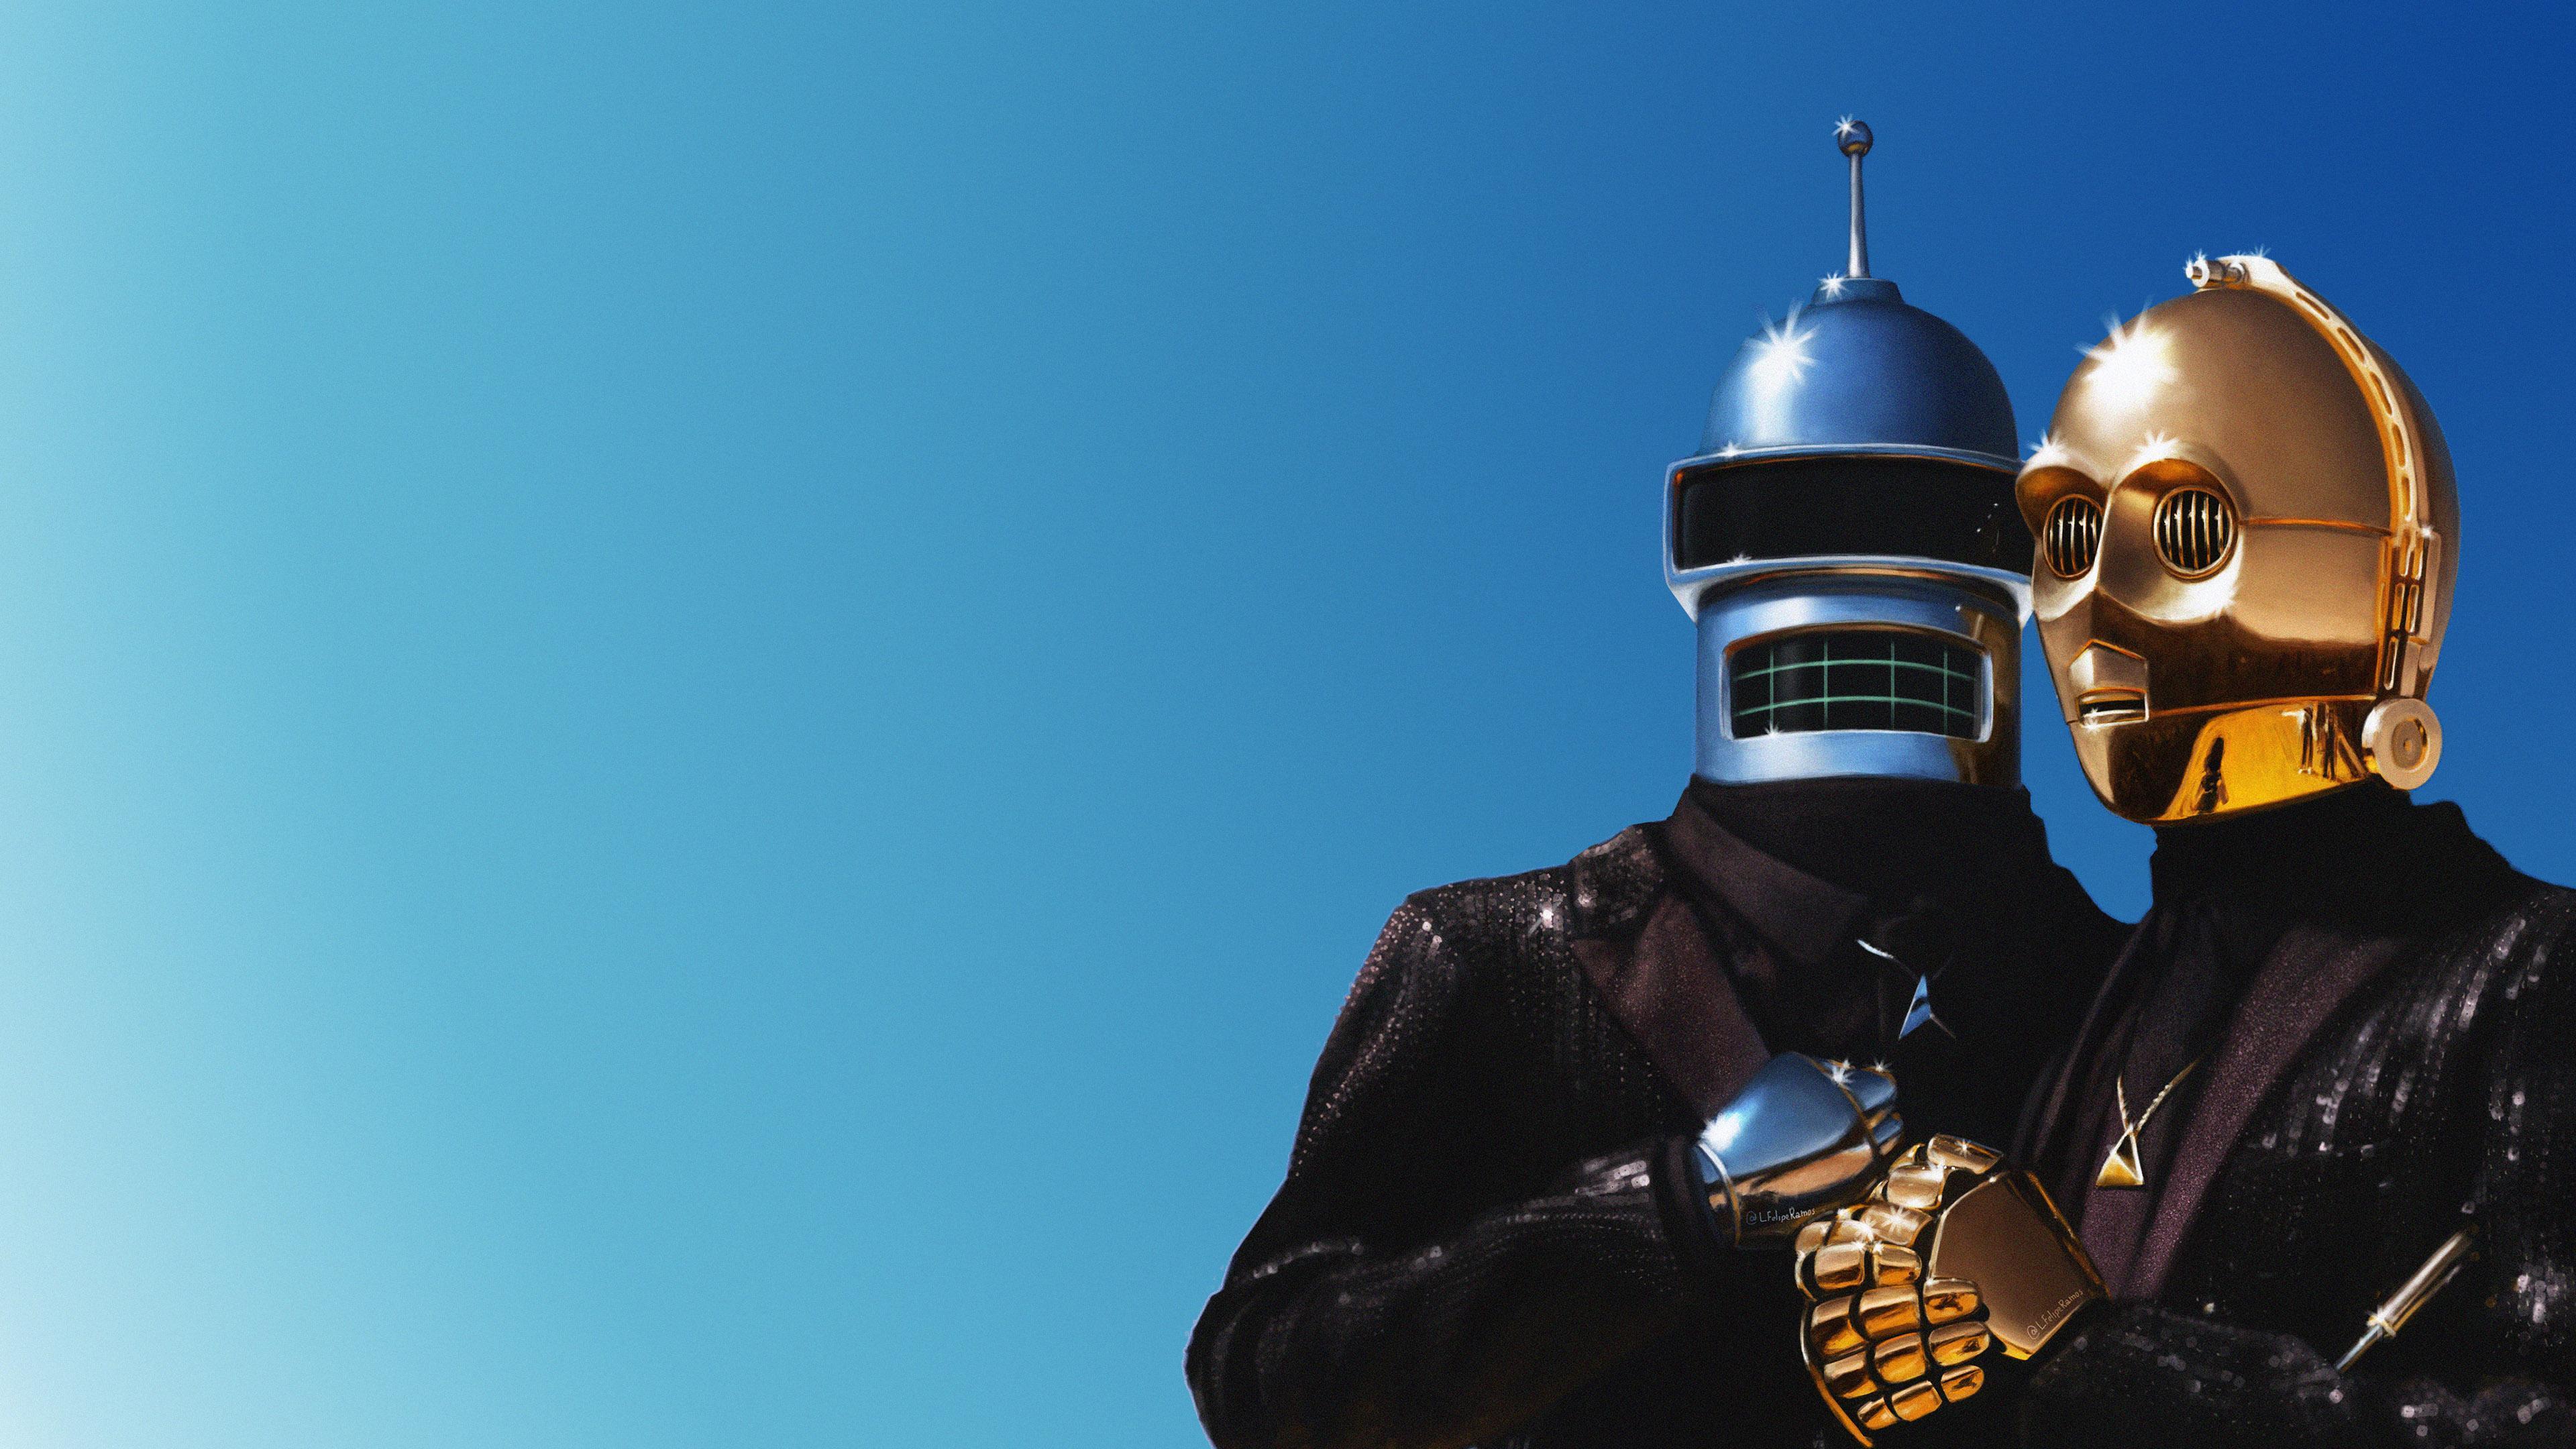 HD wallpaper, C 3Po, Daft Punk, Bender, Blue, Music, Silver, Android C3Po, Yellow, Sky, Gold